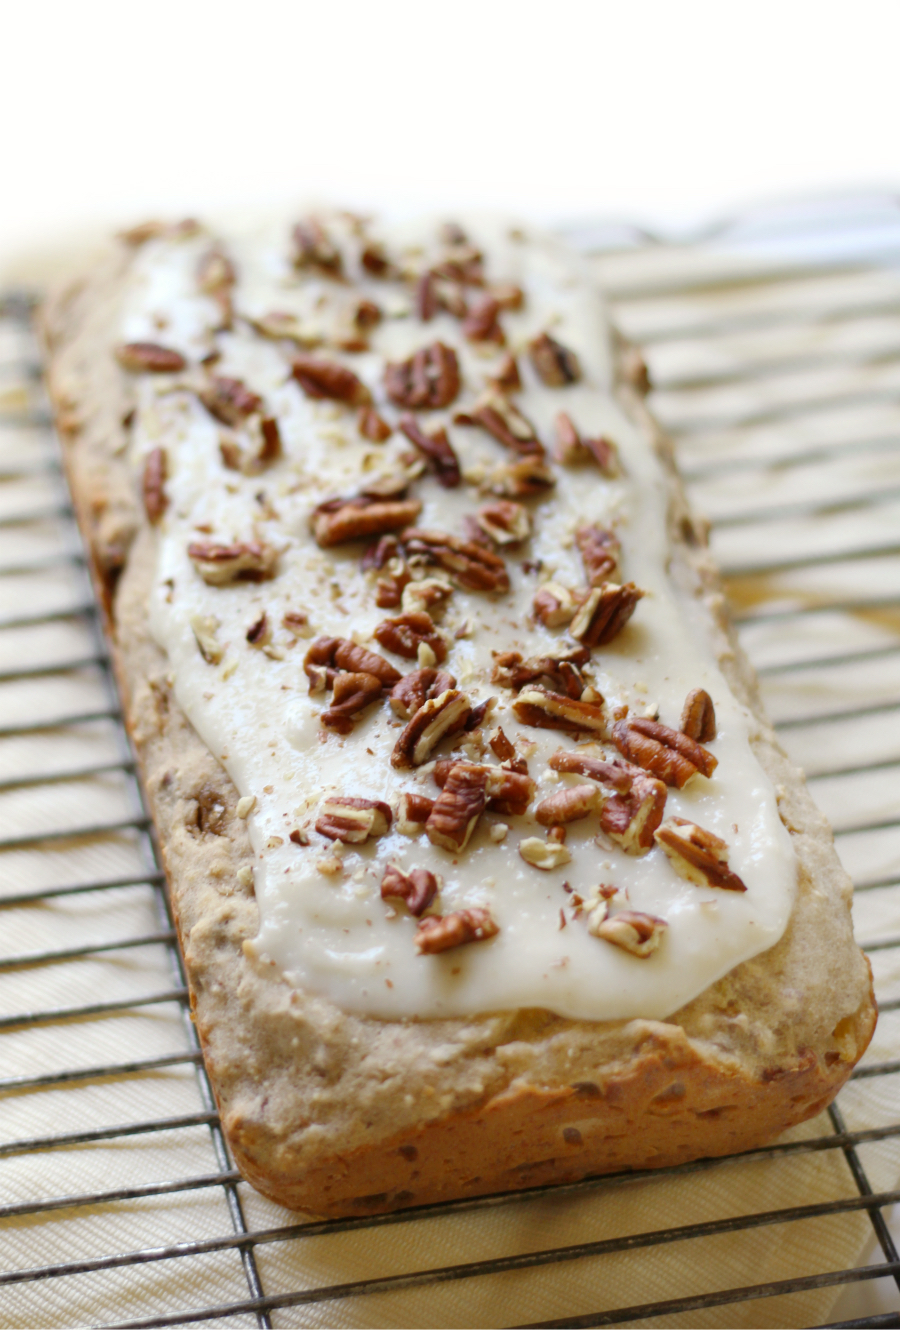 Gluten-Free Hummingbird Loaf Cake (Vegan) | Strength and Sunshine @RebeccaGF666 The sweet and nutty classic Southern dessert now with a gluten-free and vegan recipe! Gluten-Free Hummingbird Loaf Cake topped with a delicious dairy-free cream cheese frosting and packed with pecans, banana, and pineapple!